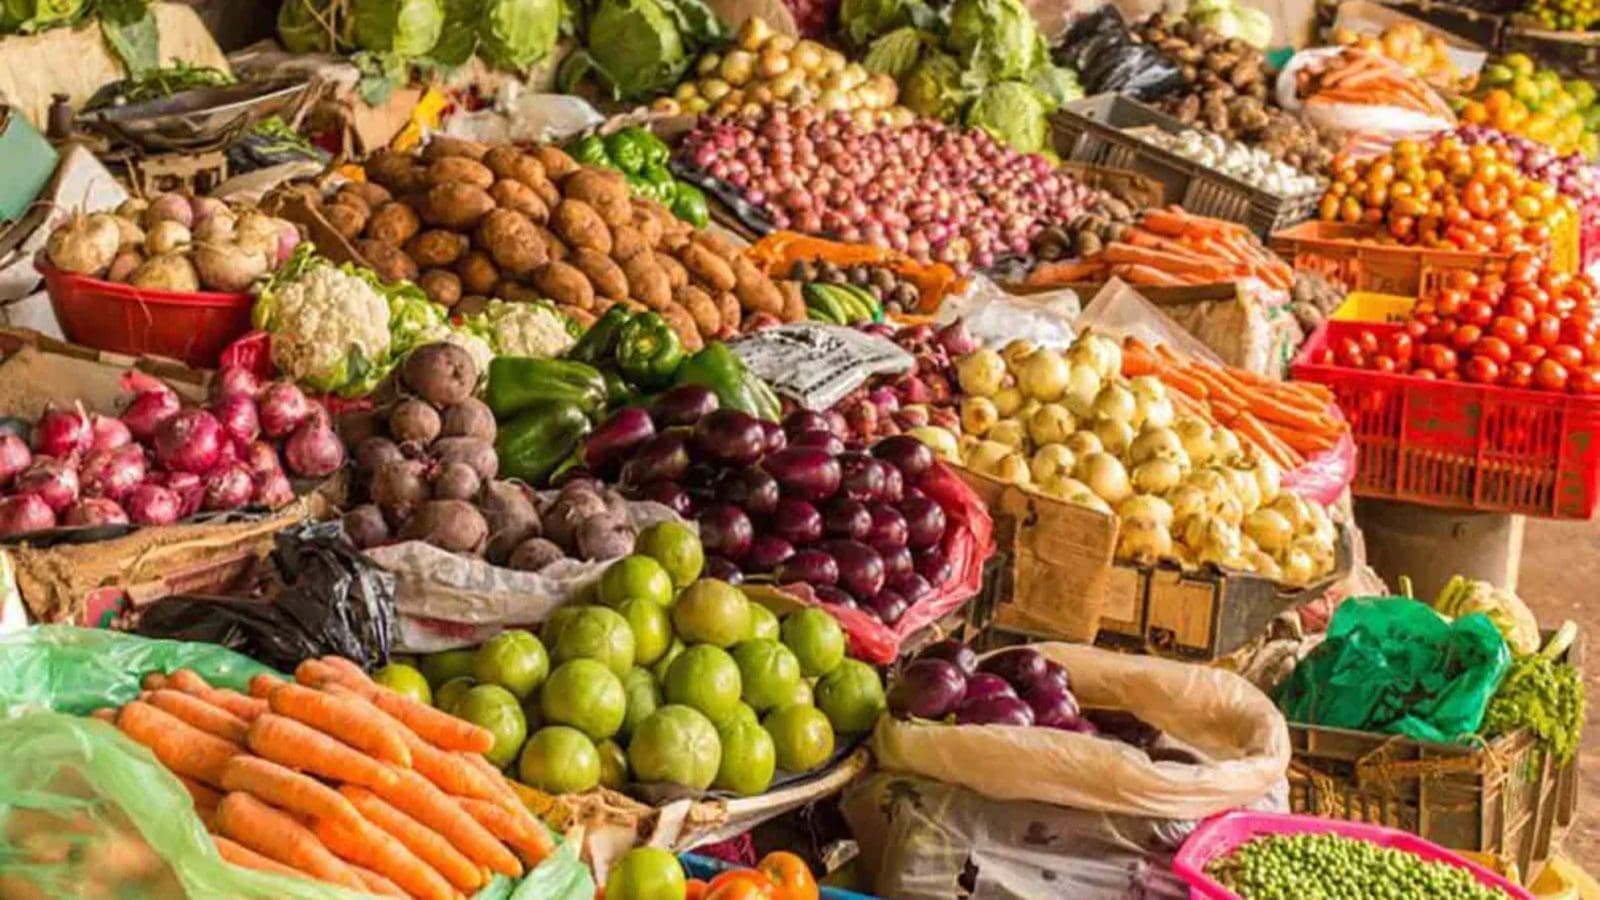 UN calls for overhaul of regulations for food, commodity traders to address overcharge concerns